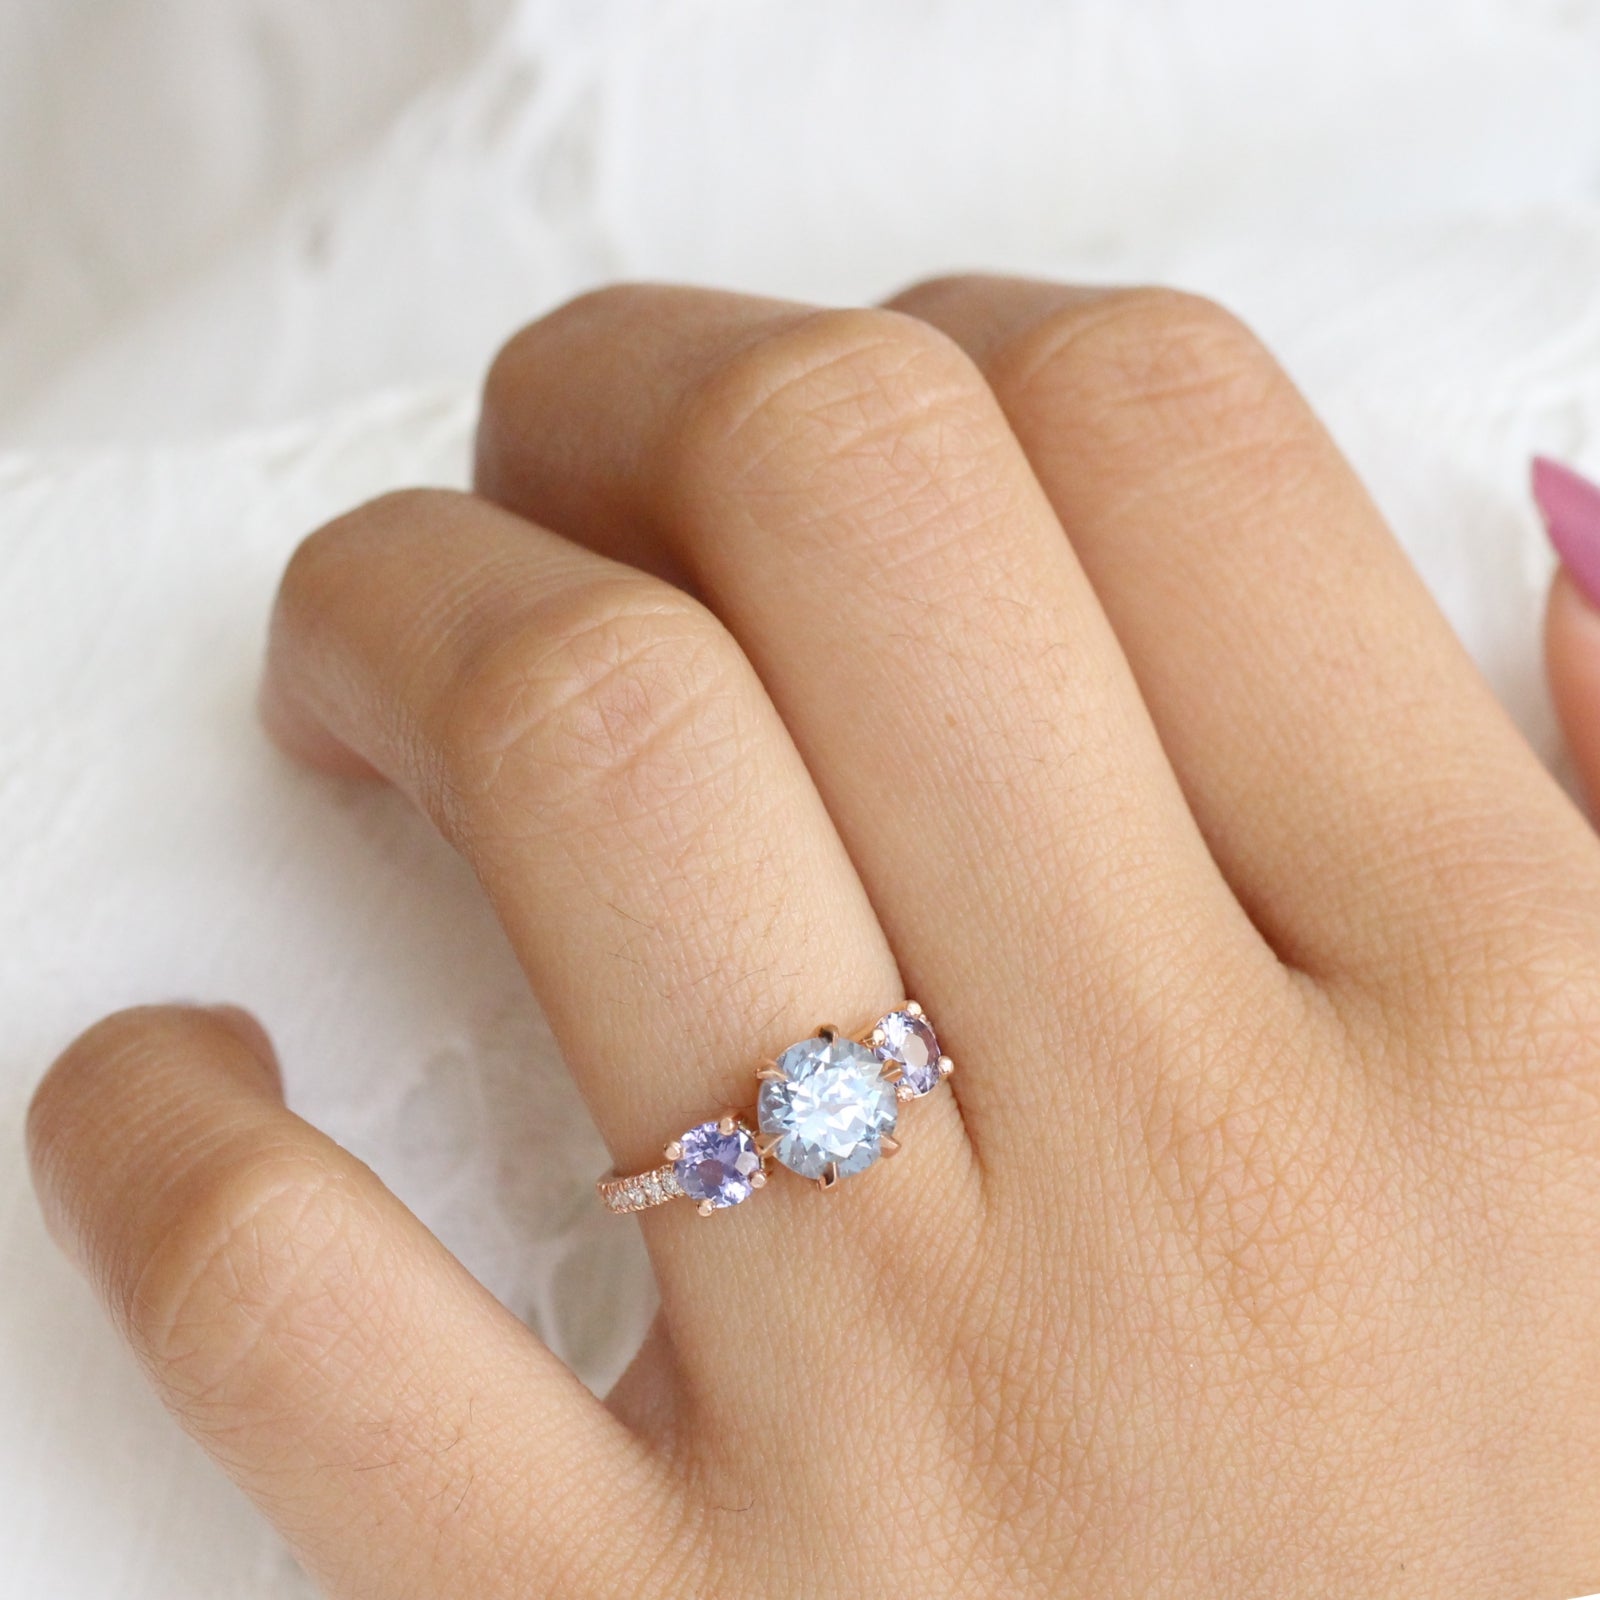 Aqua Blue Sapphire Engagement Ring in Rose Gold 3 Stone Diamond Ring by La More Design Jewelry